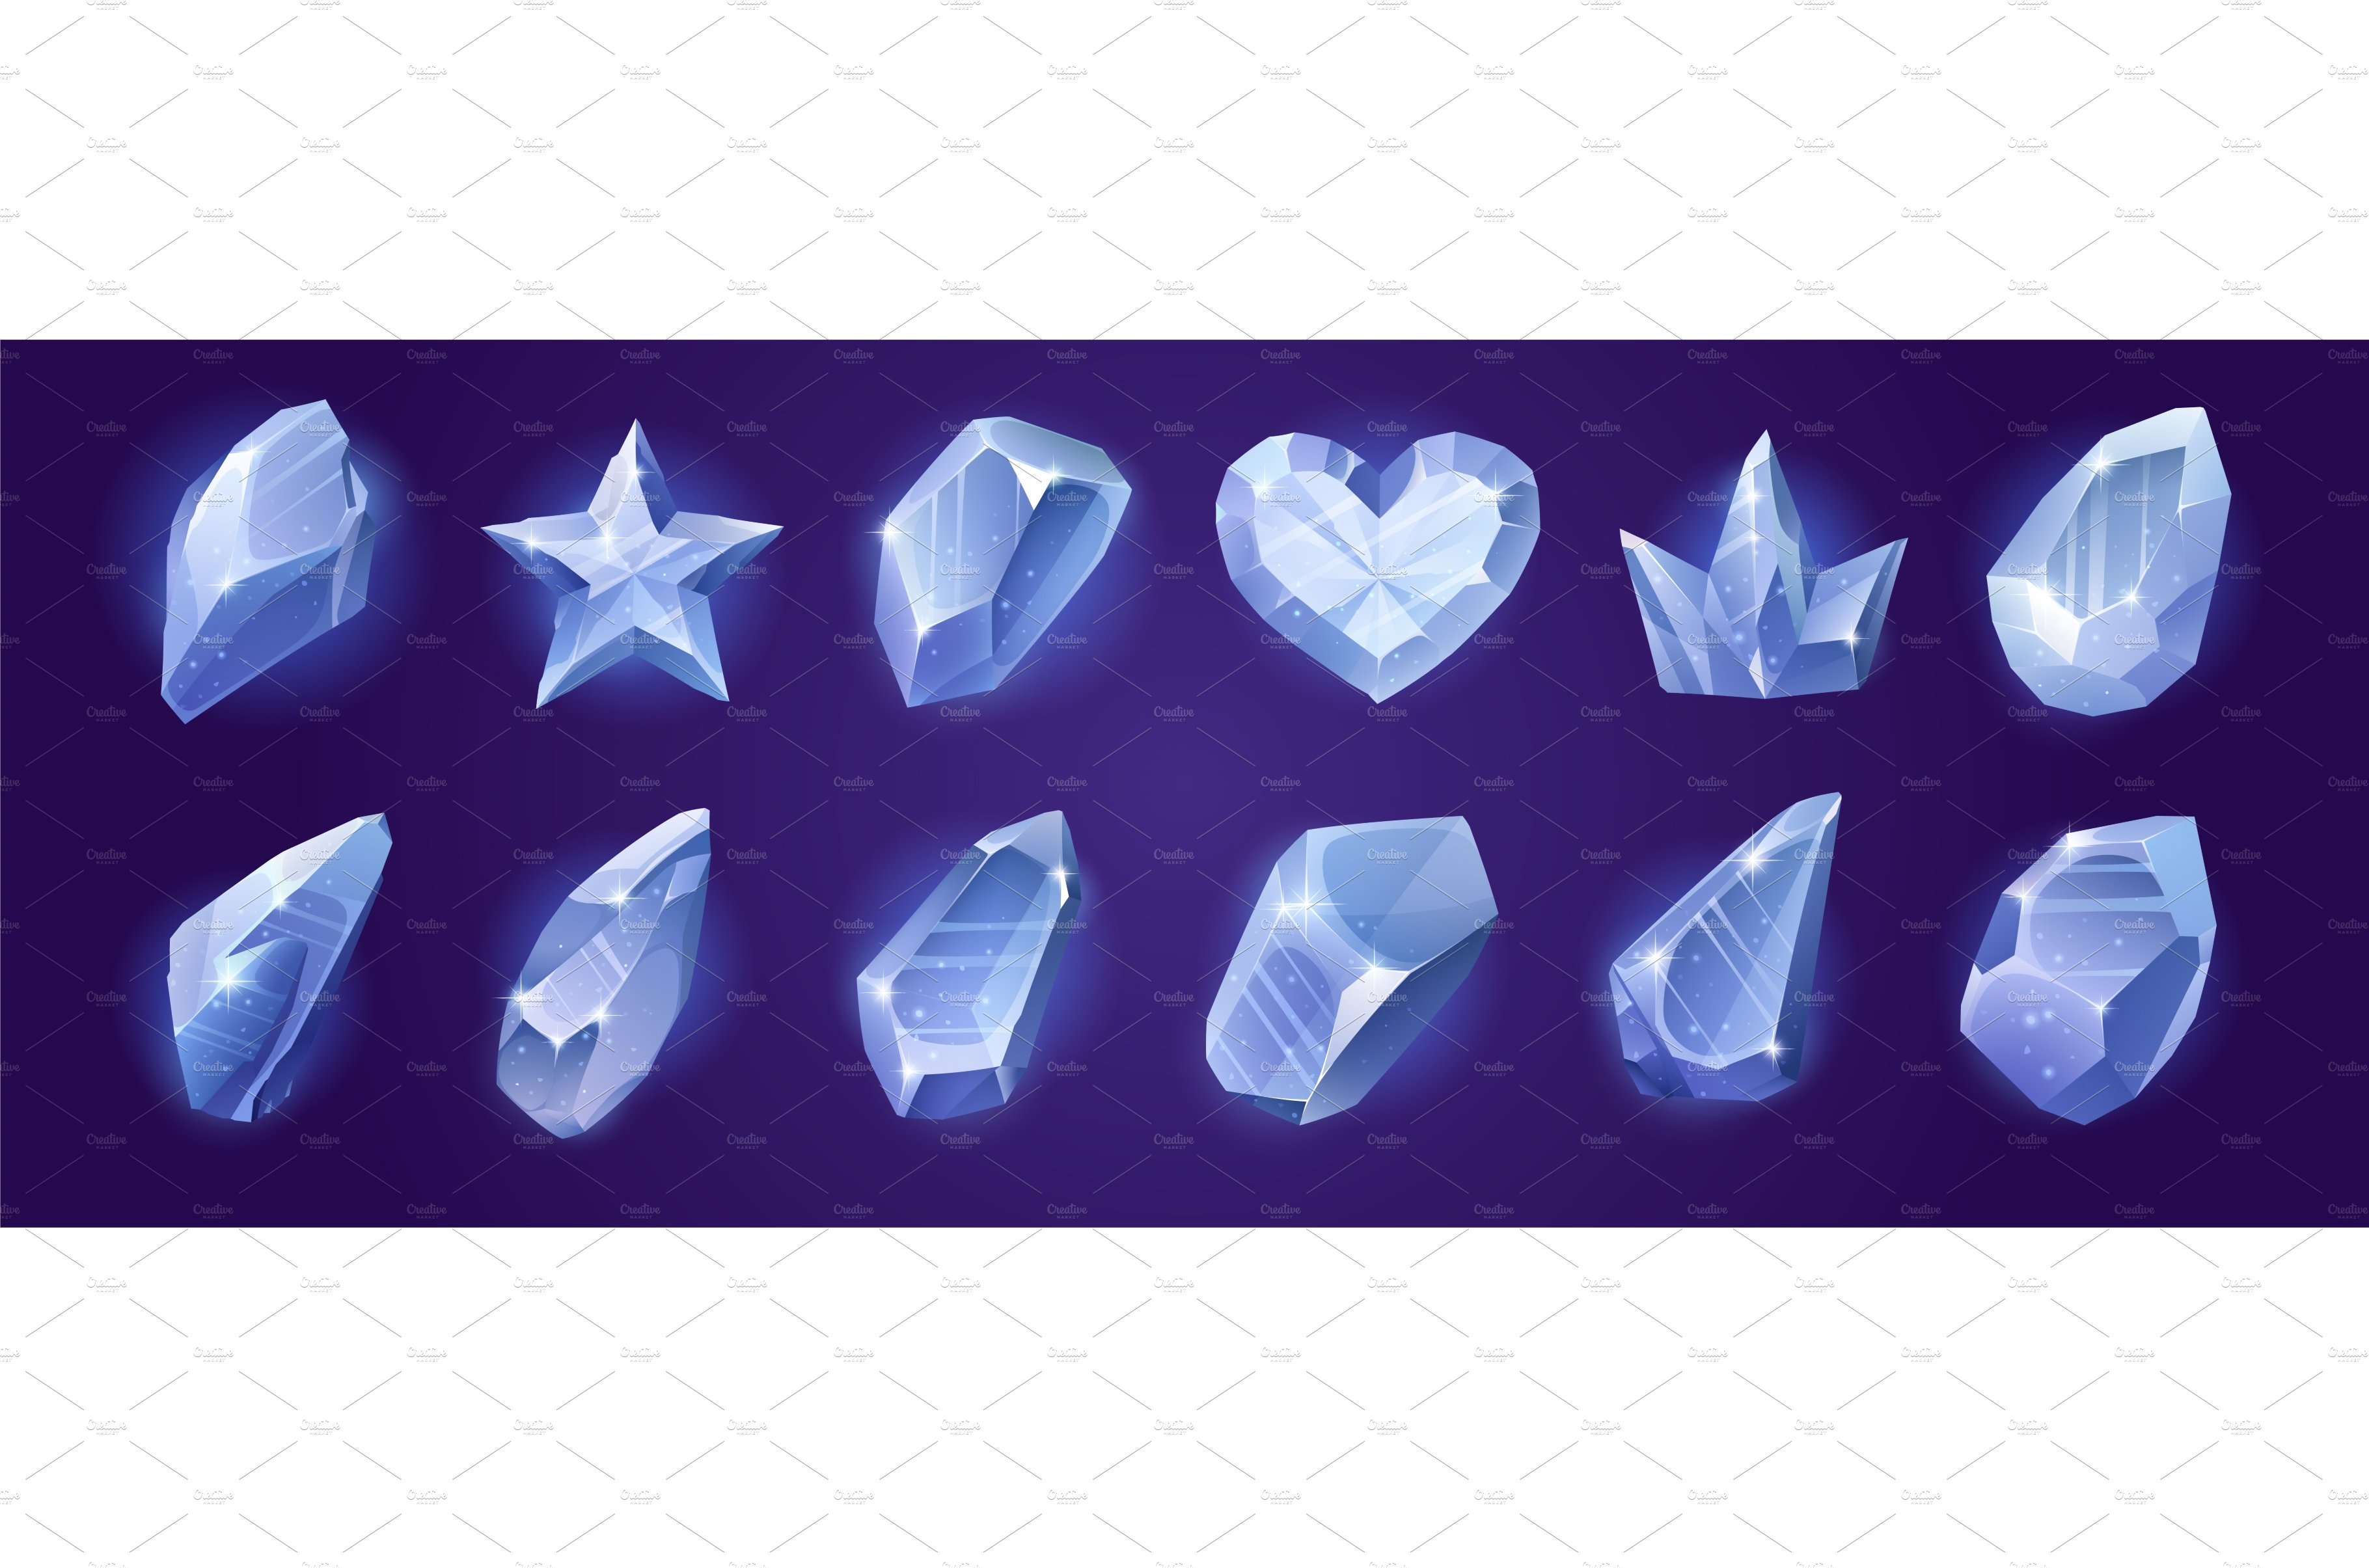 Game icons of diamond crystals, blue cover image.